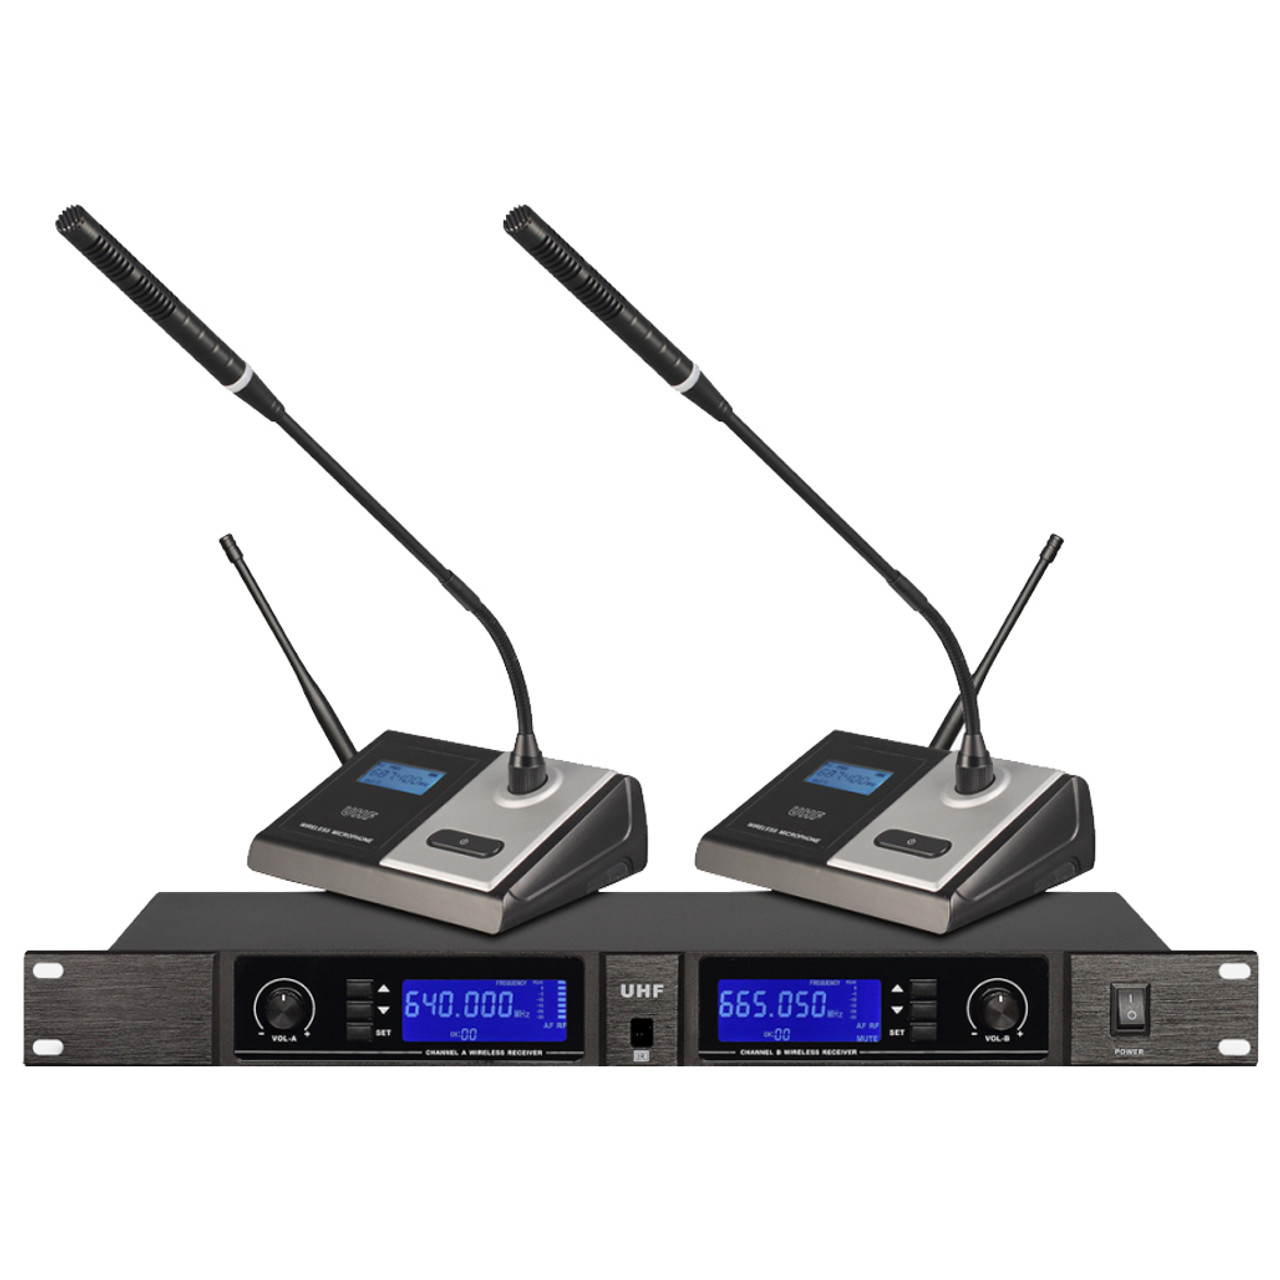 UHF Professional Wireless Conference Microphone 2 Channel (A41)